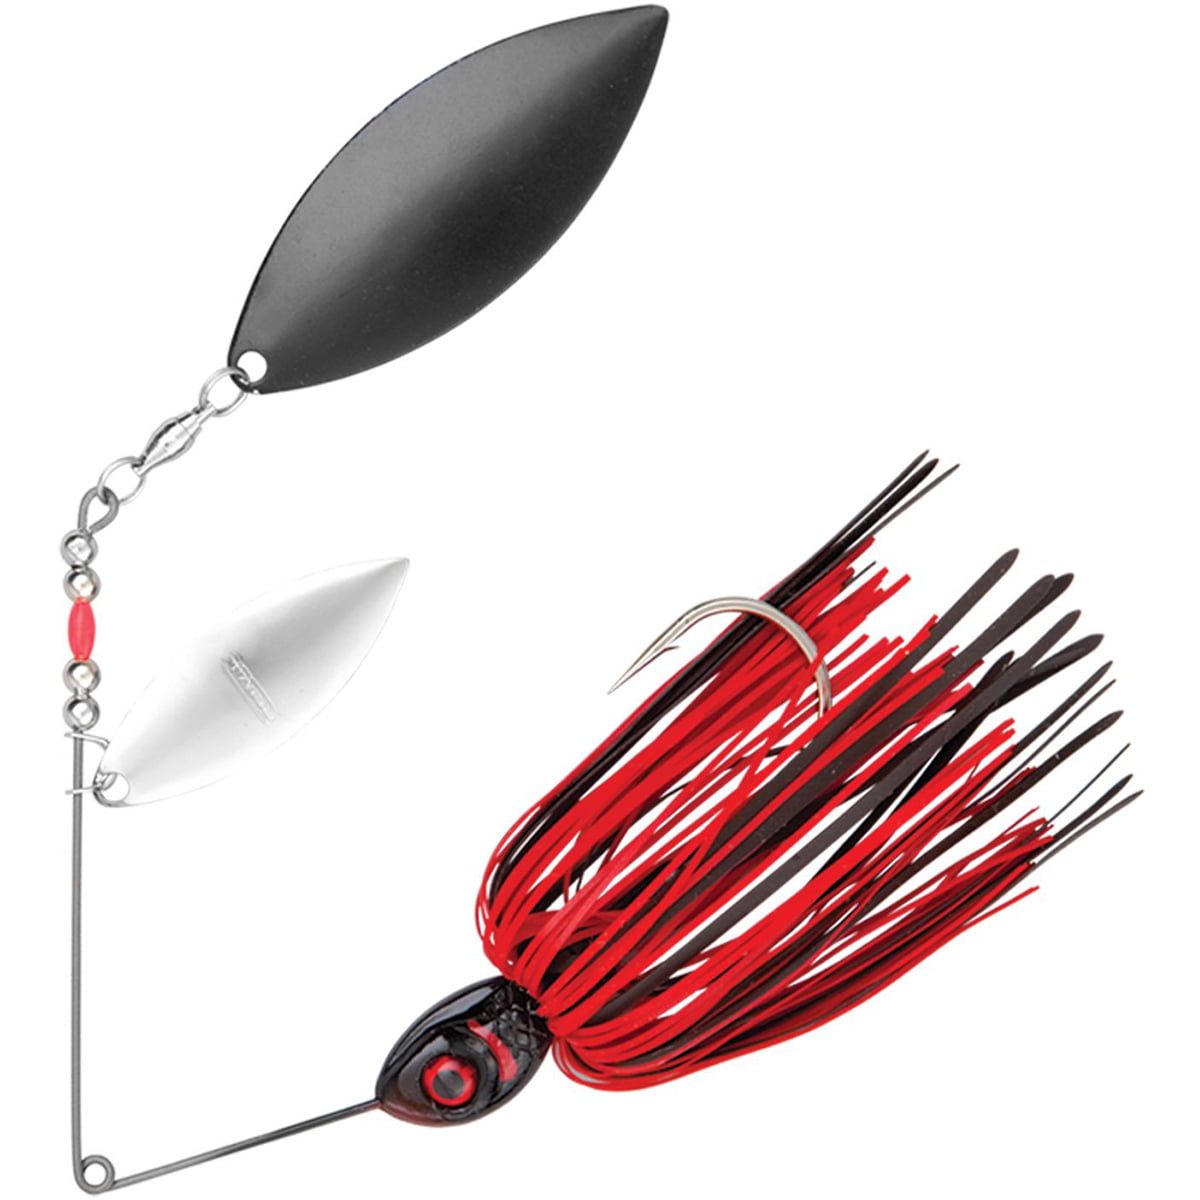 Booyah Baits Pikee 1/2 oz Fishing Lure - Red Craw/Nickel & Black Willows 